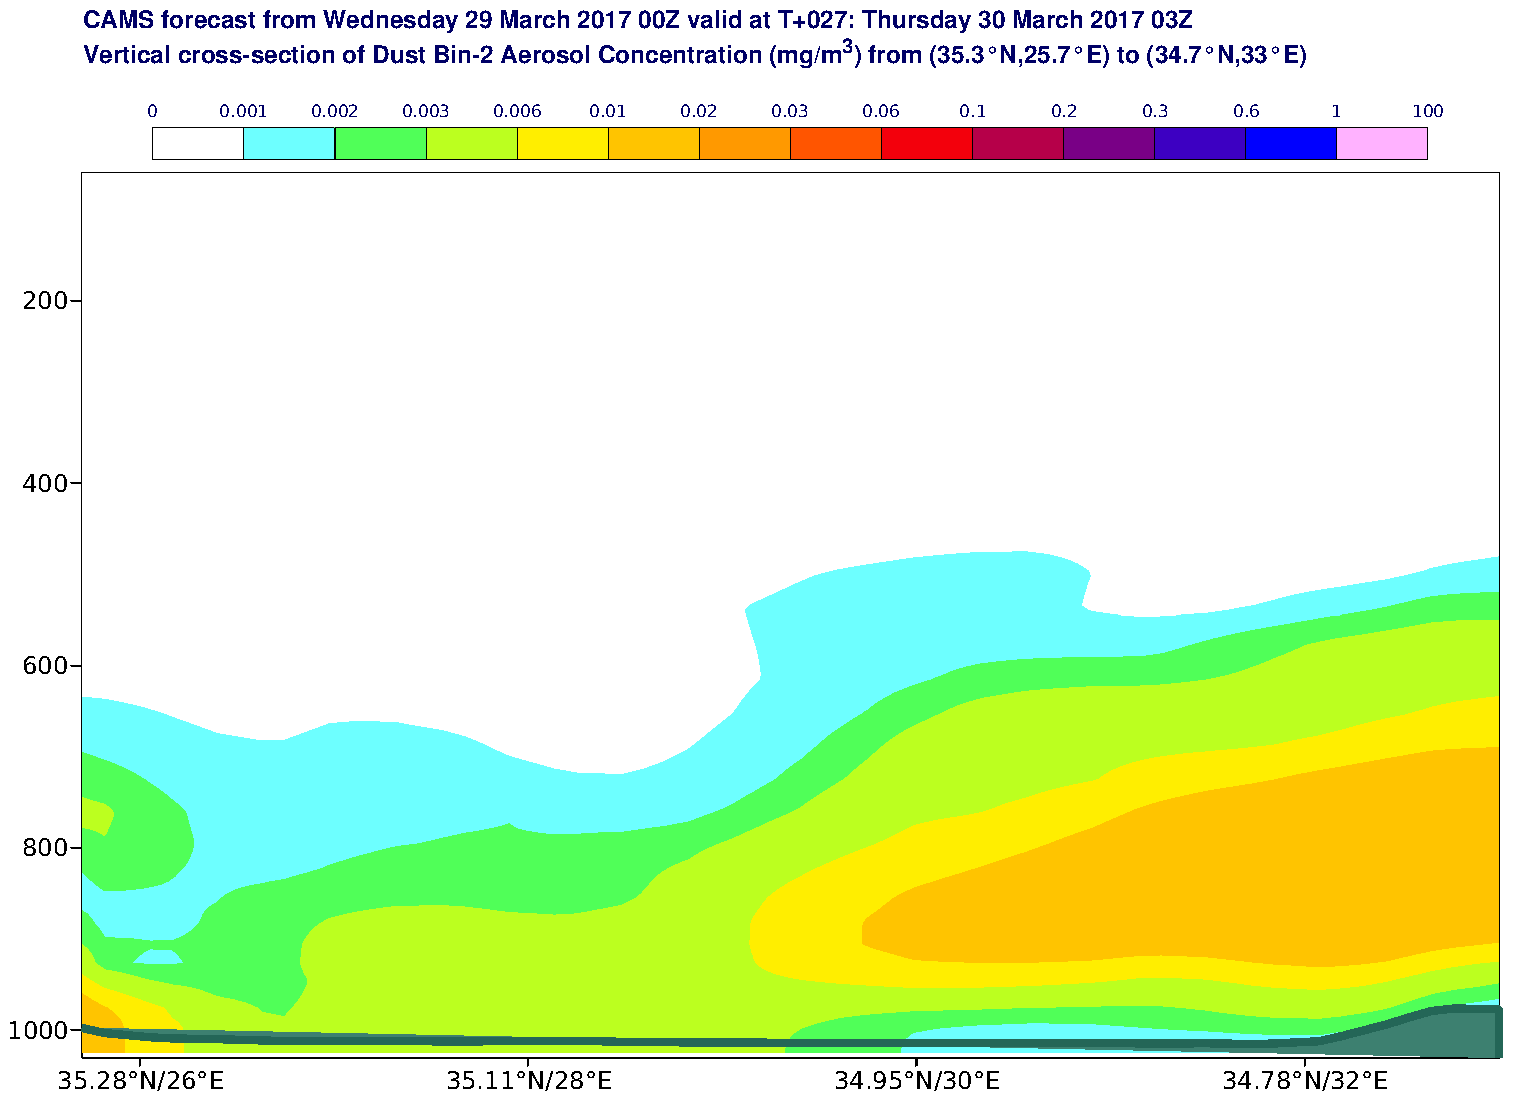 Vertical cross-section of Dust Bin-2 Aerosol Concentration (mg/m3) valid at T27 - 2017-03-30 03:00